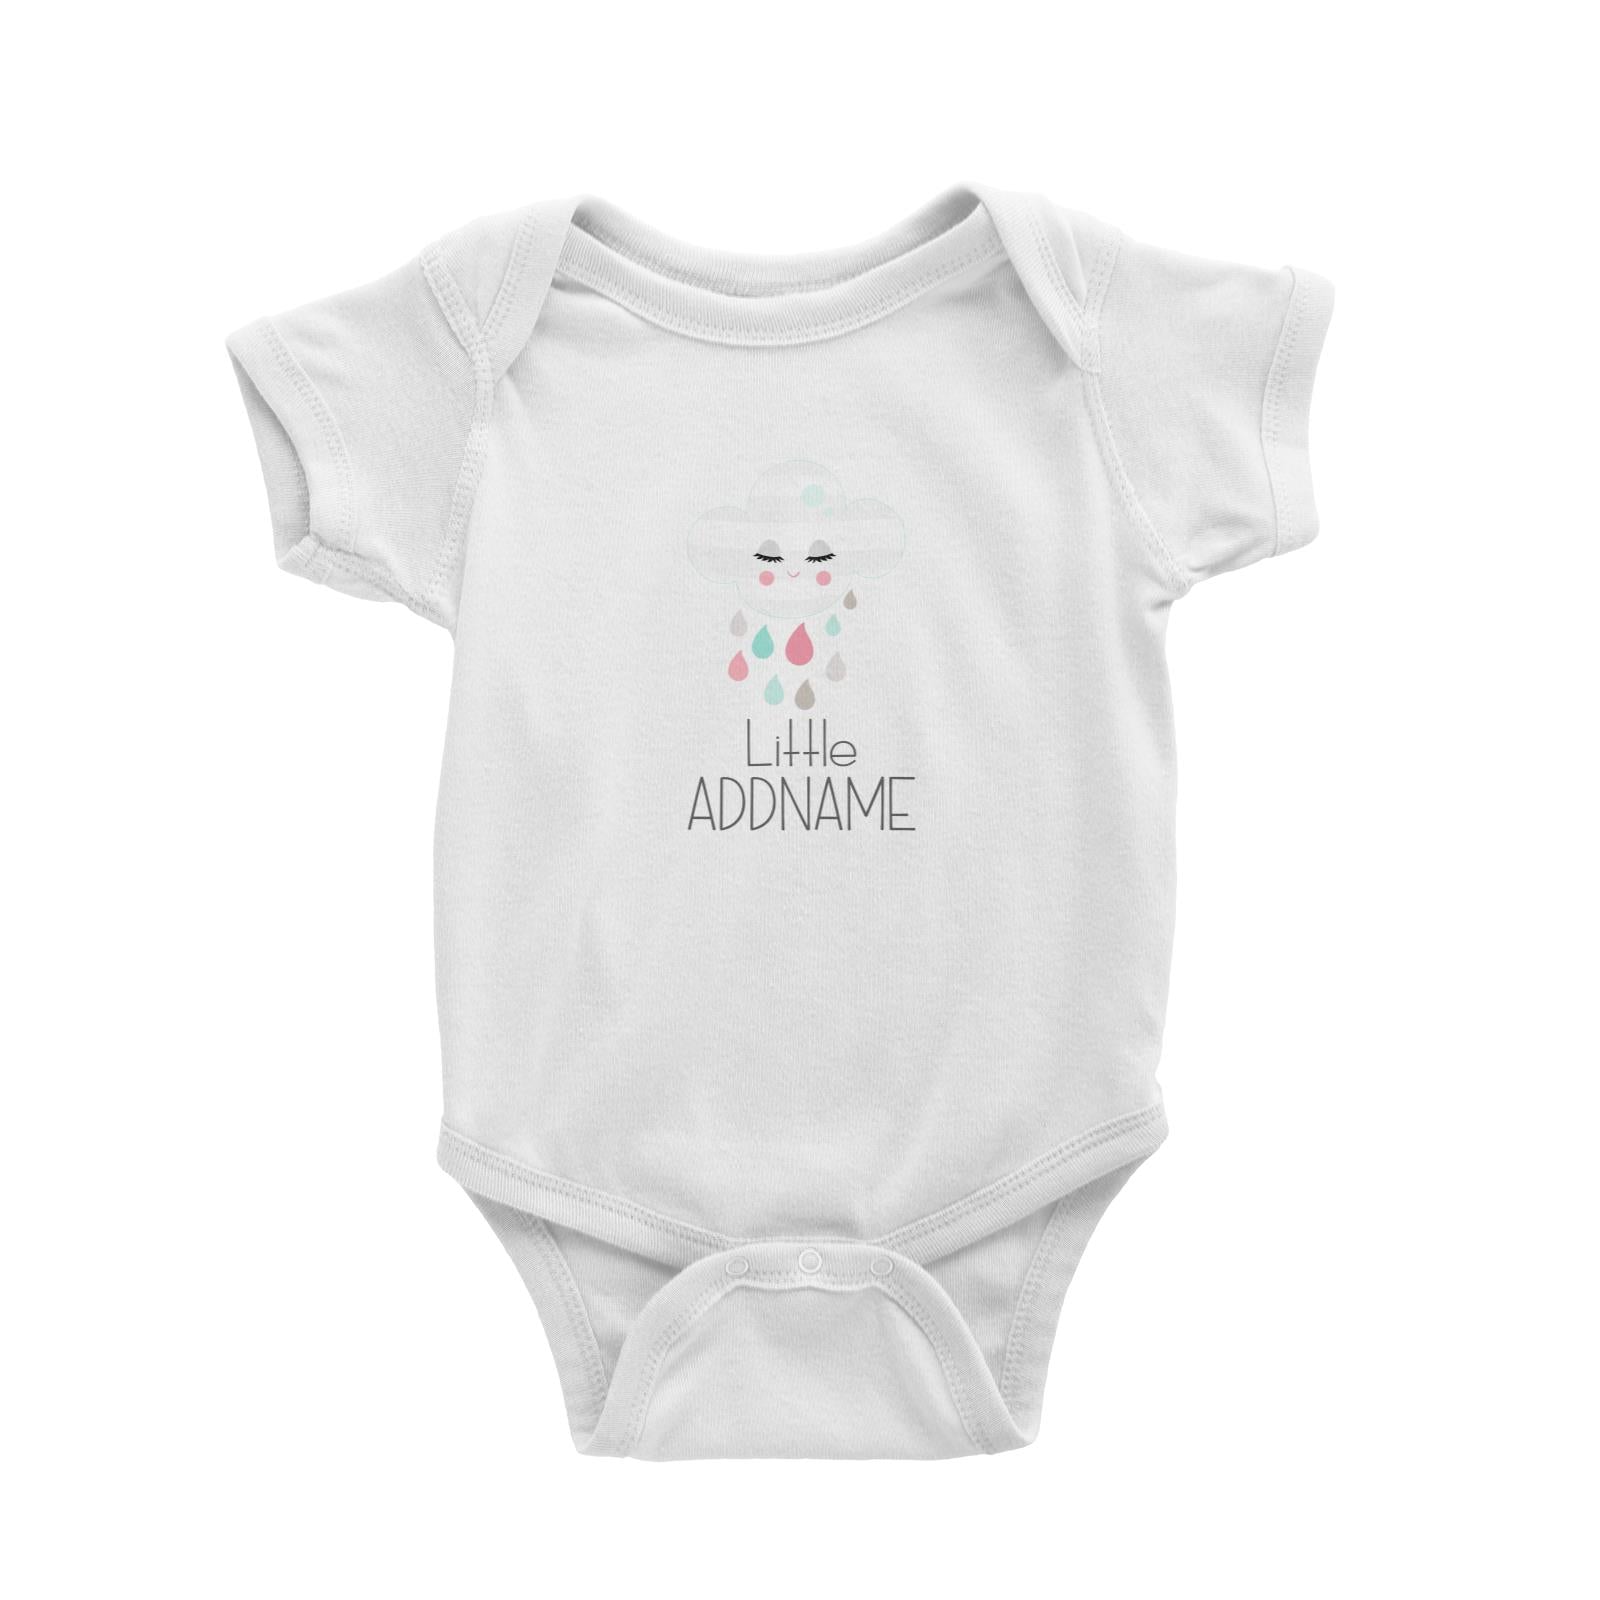 Nursery Animals Little Cloud with Rain Addname White Baby Romper